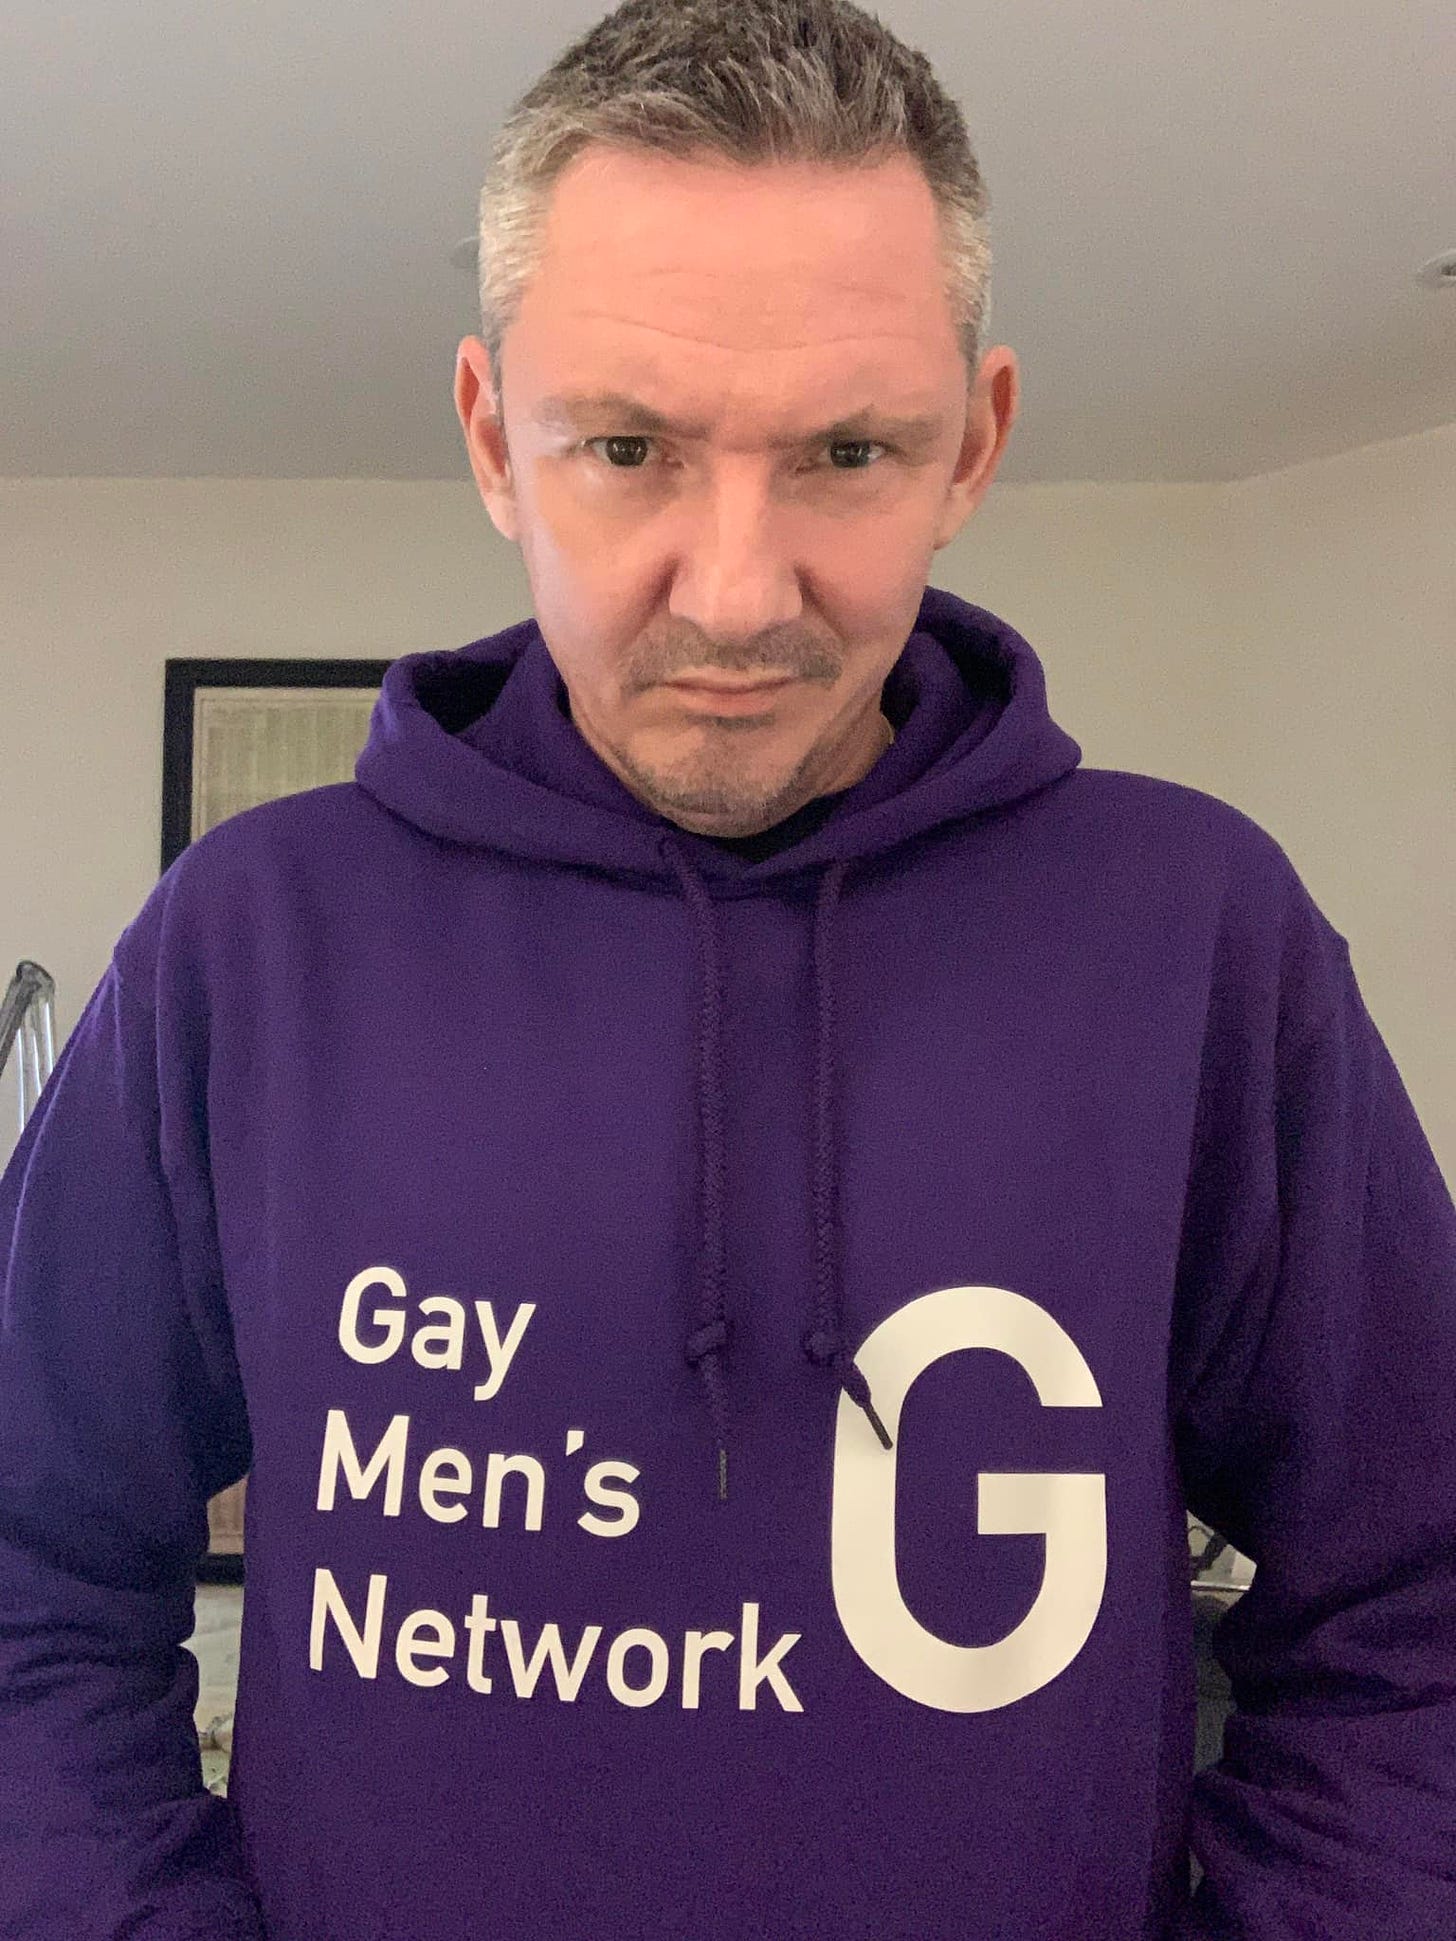 May be an image of 1 person, beard and text that says 'Gay Men's Network G'